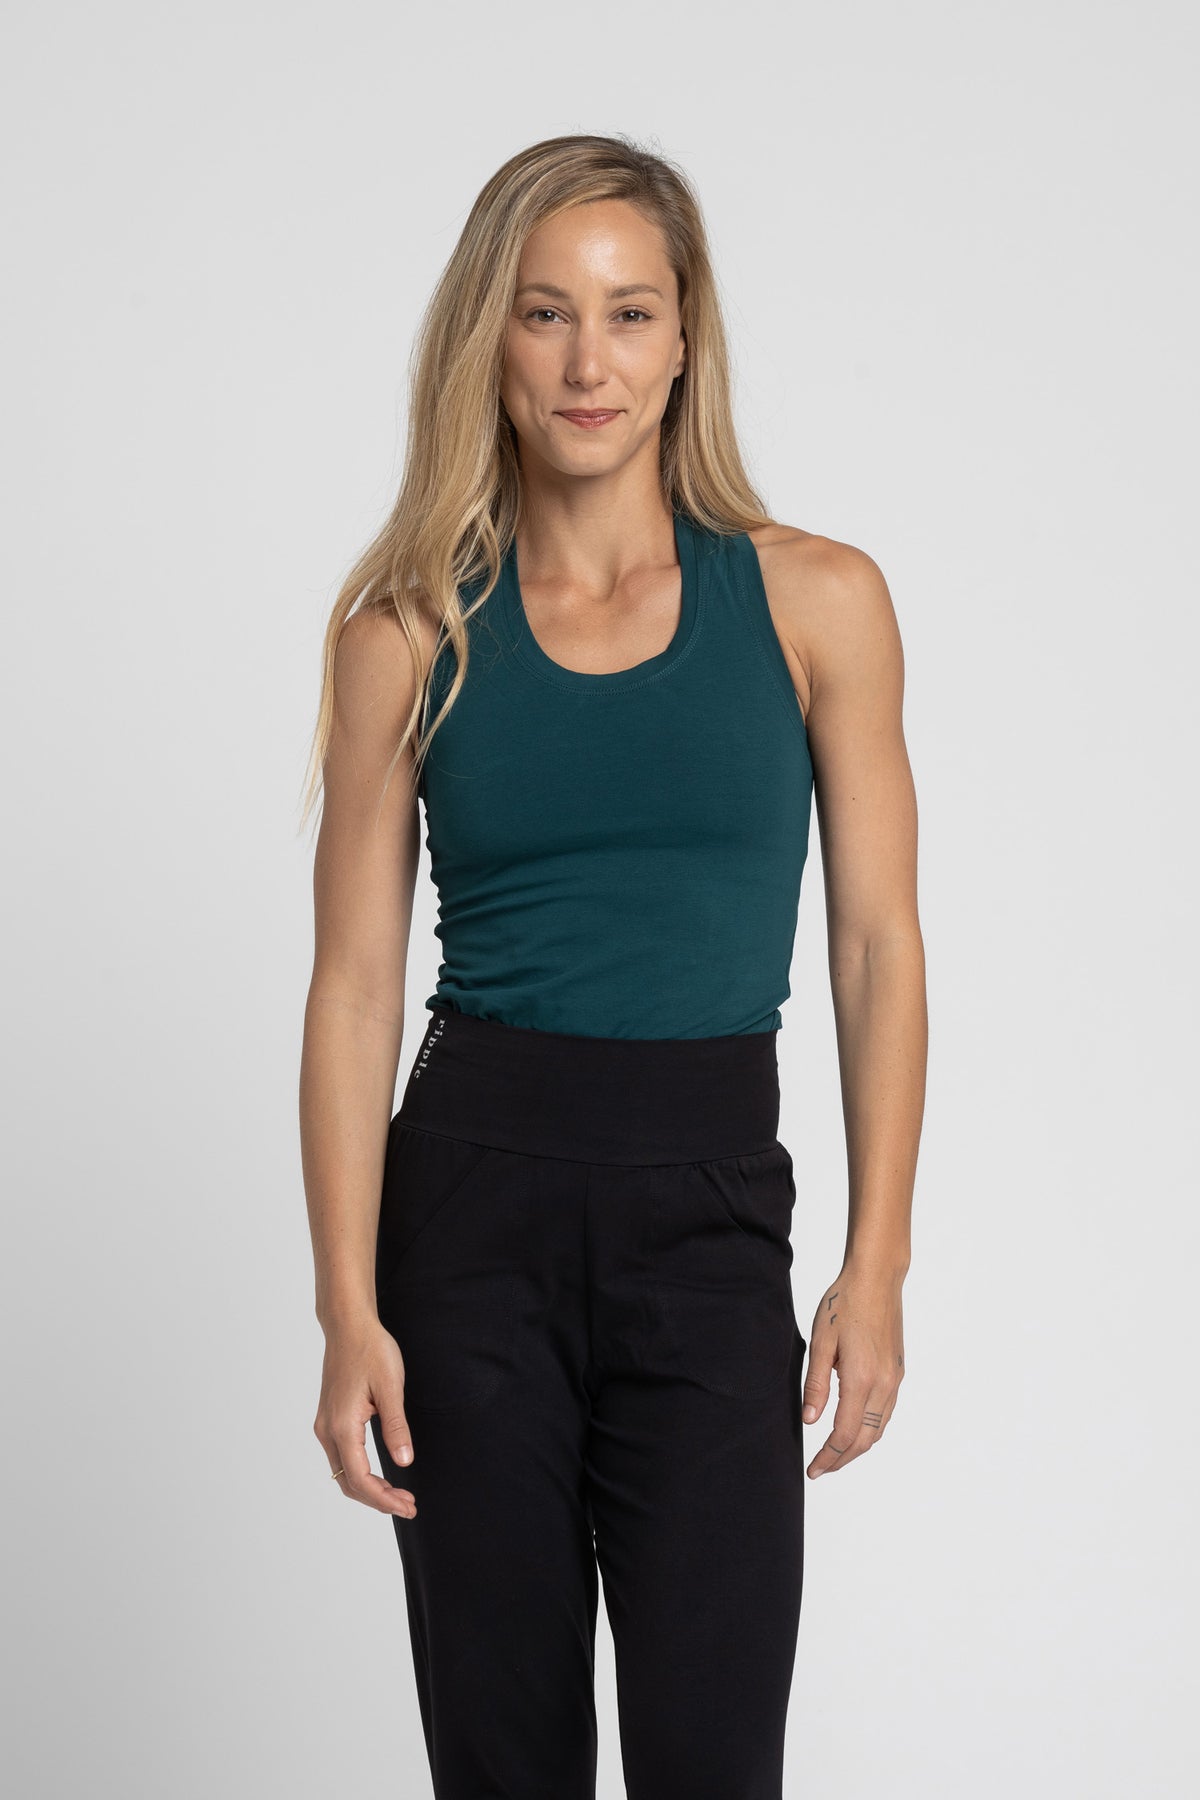 I’mPerfect Organic Cotton Racer Tank Top 25%off